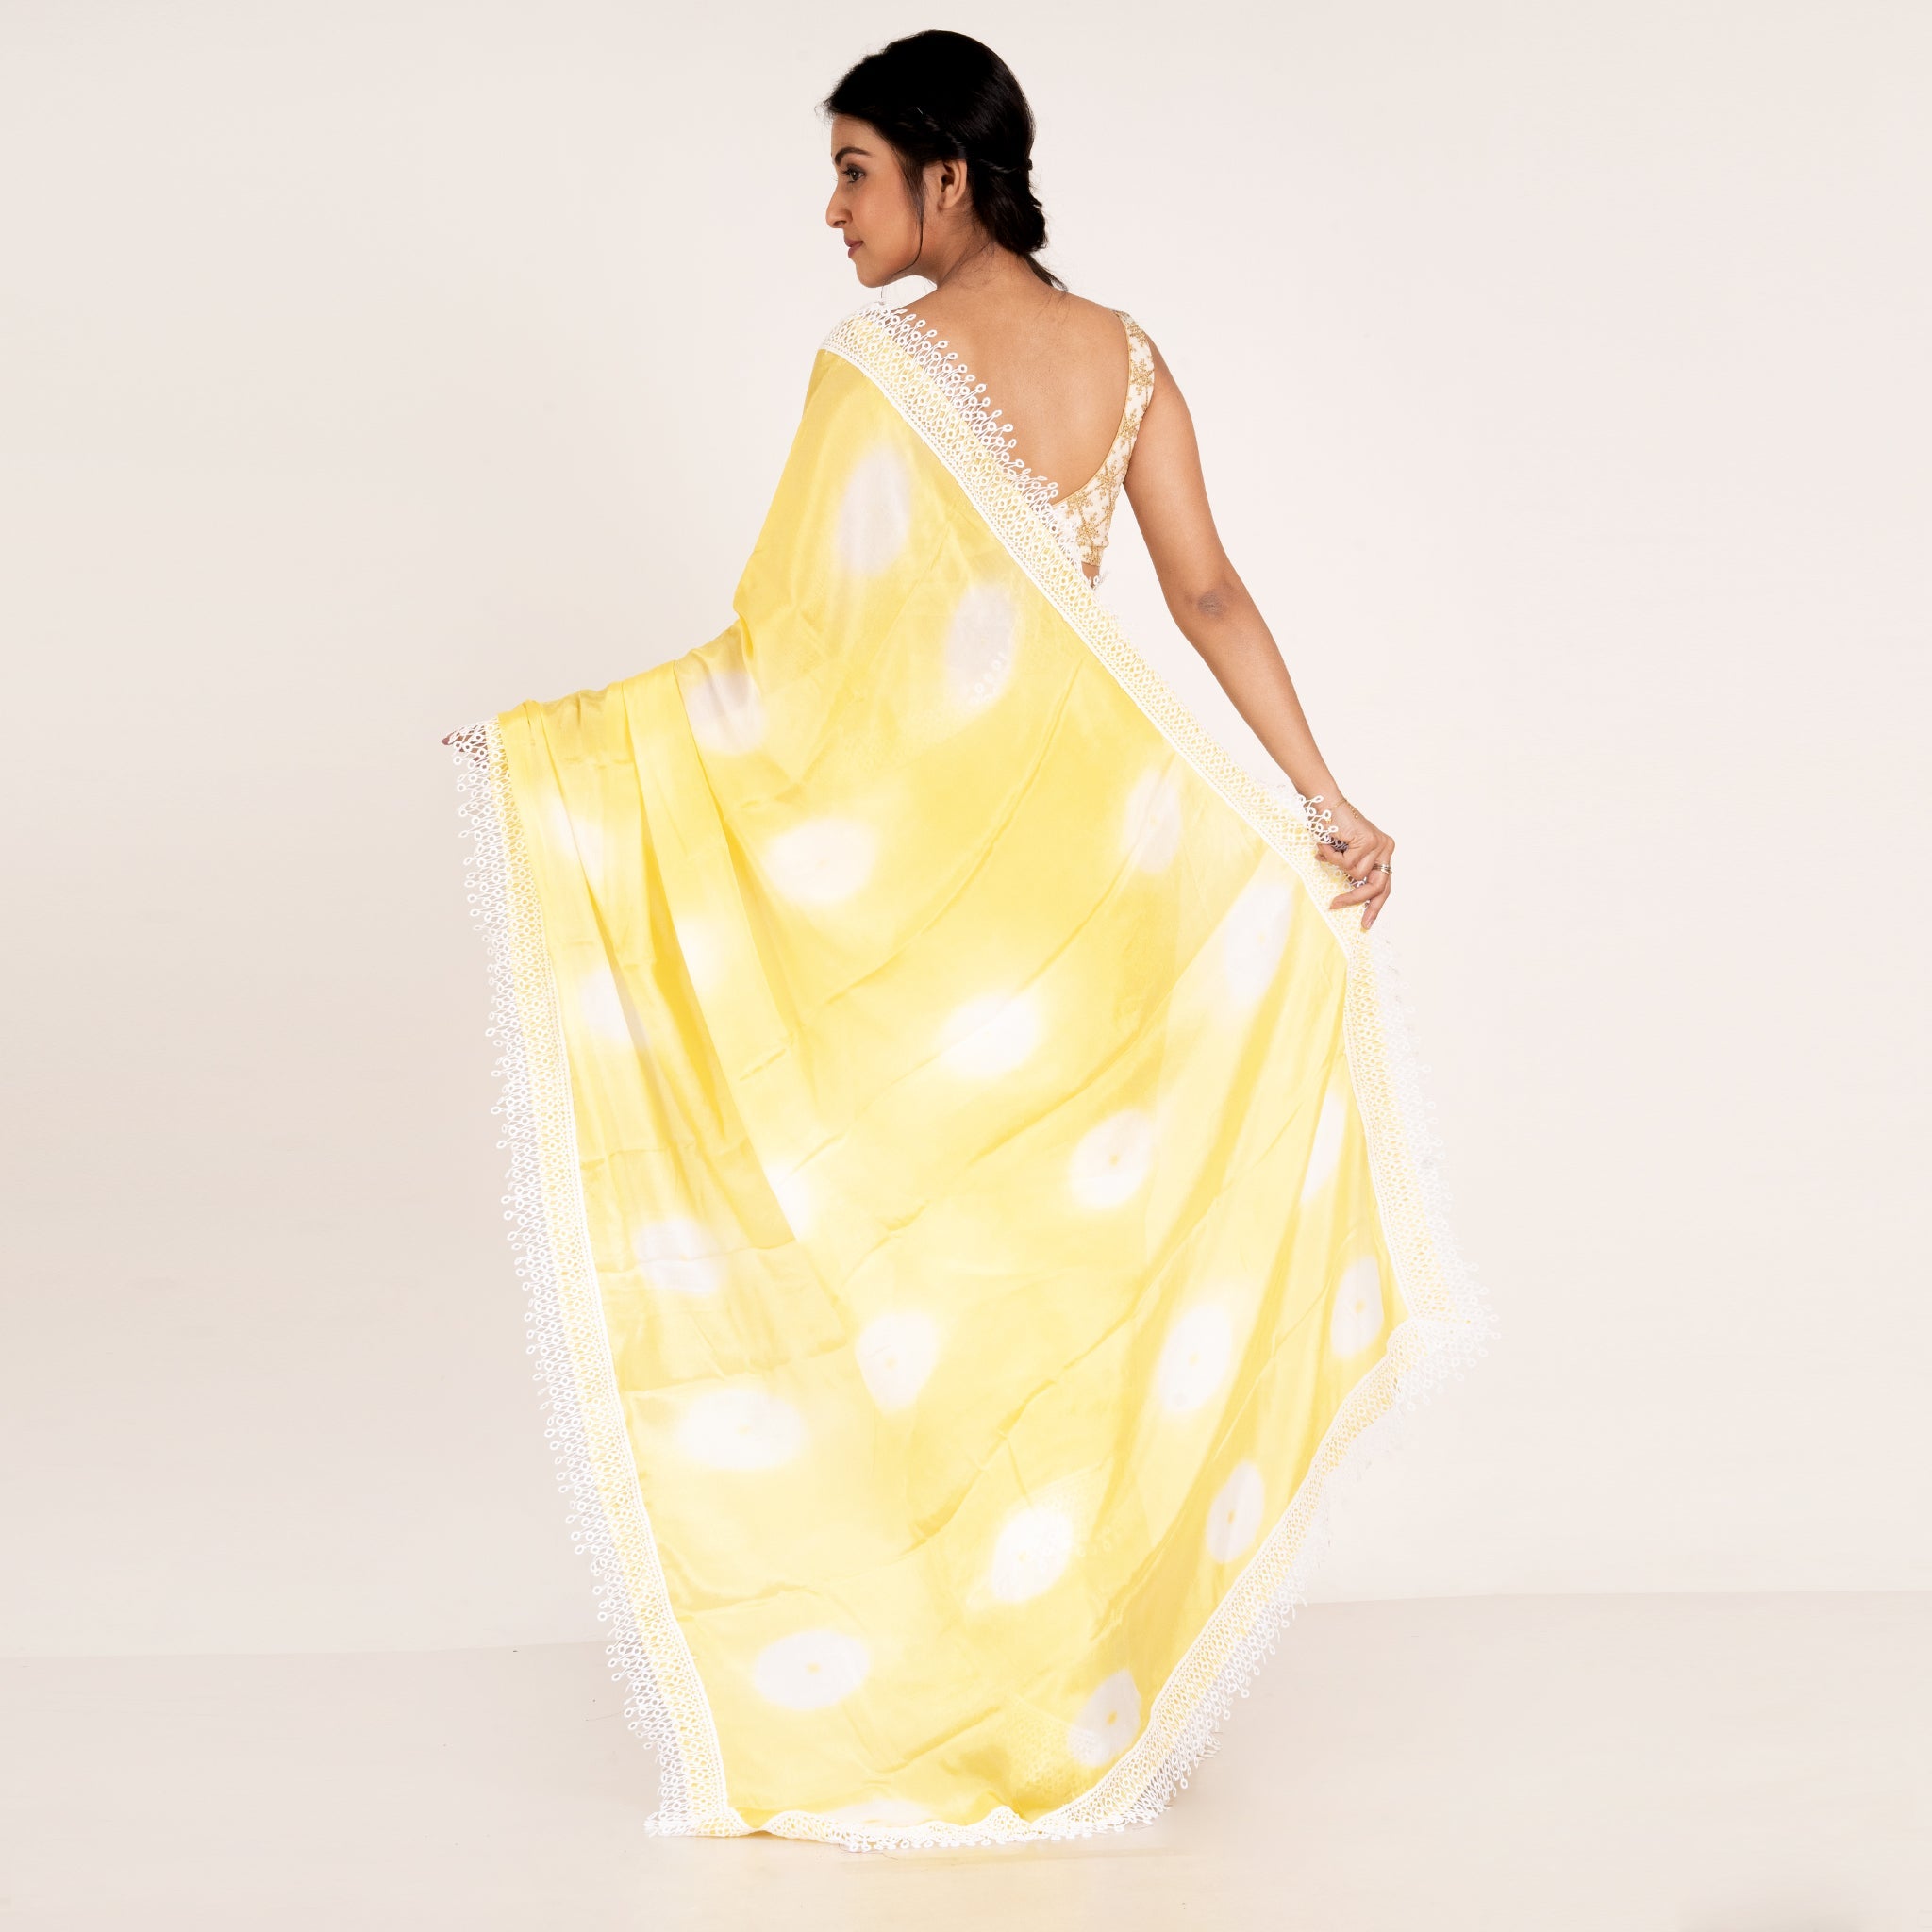 Women's Yellow Chiffon Tie And Dye Saree With Crochet Lace - Boveee